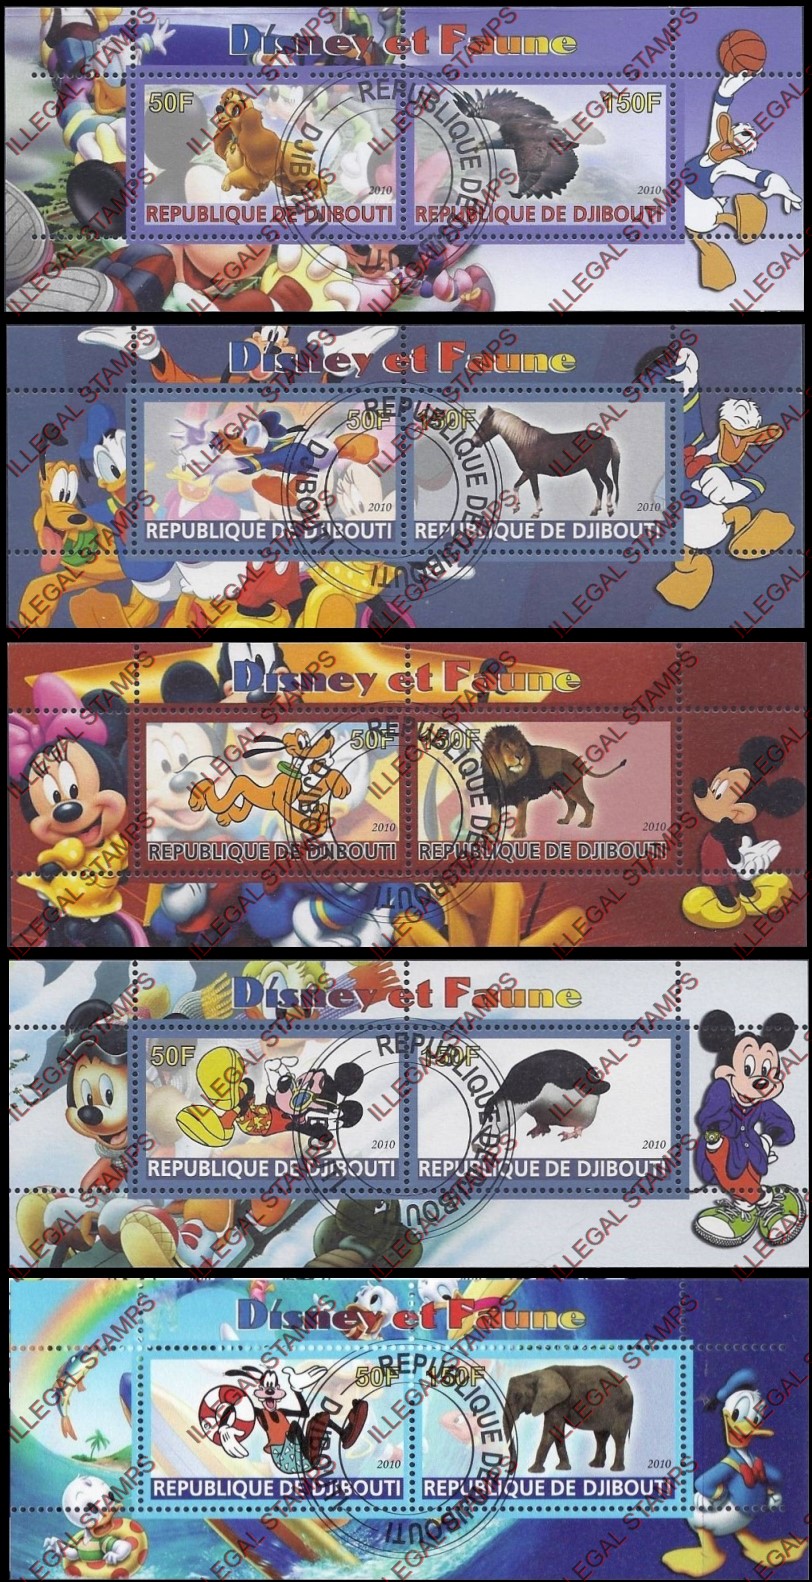 Djibouti 2010 Disney and Fauna Illegal Stamp Souvenir Sheets of 2